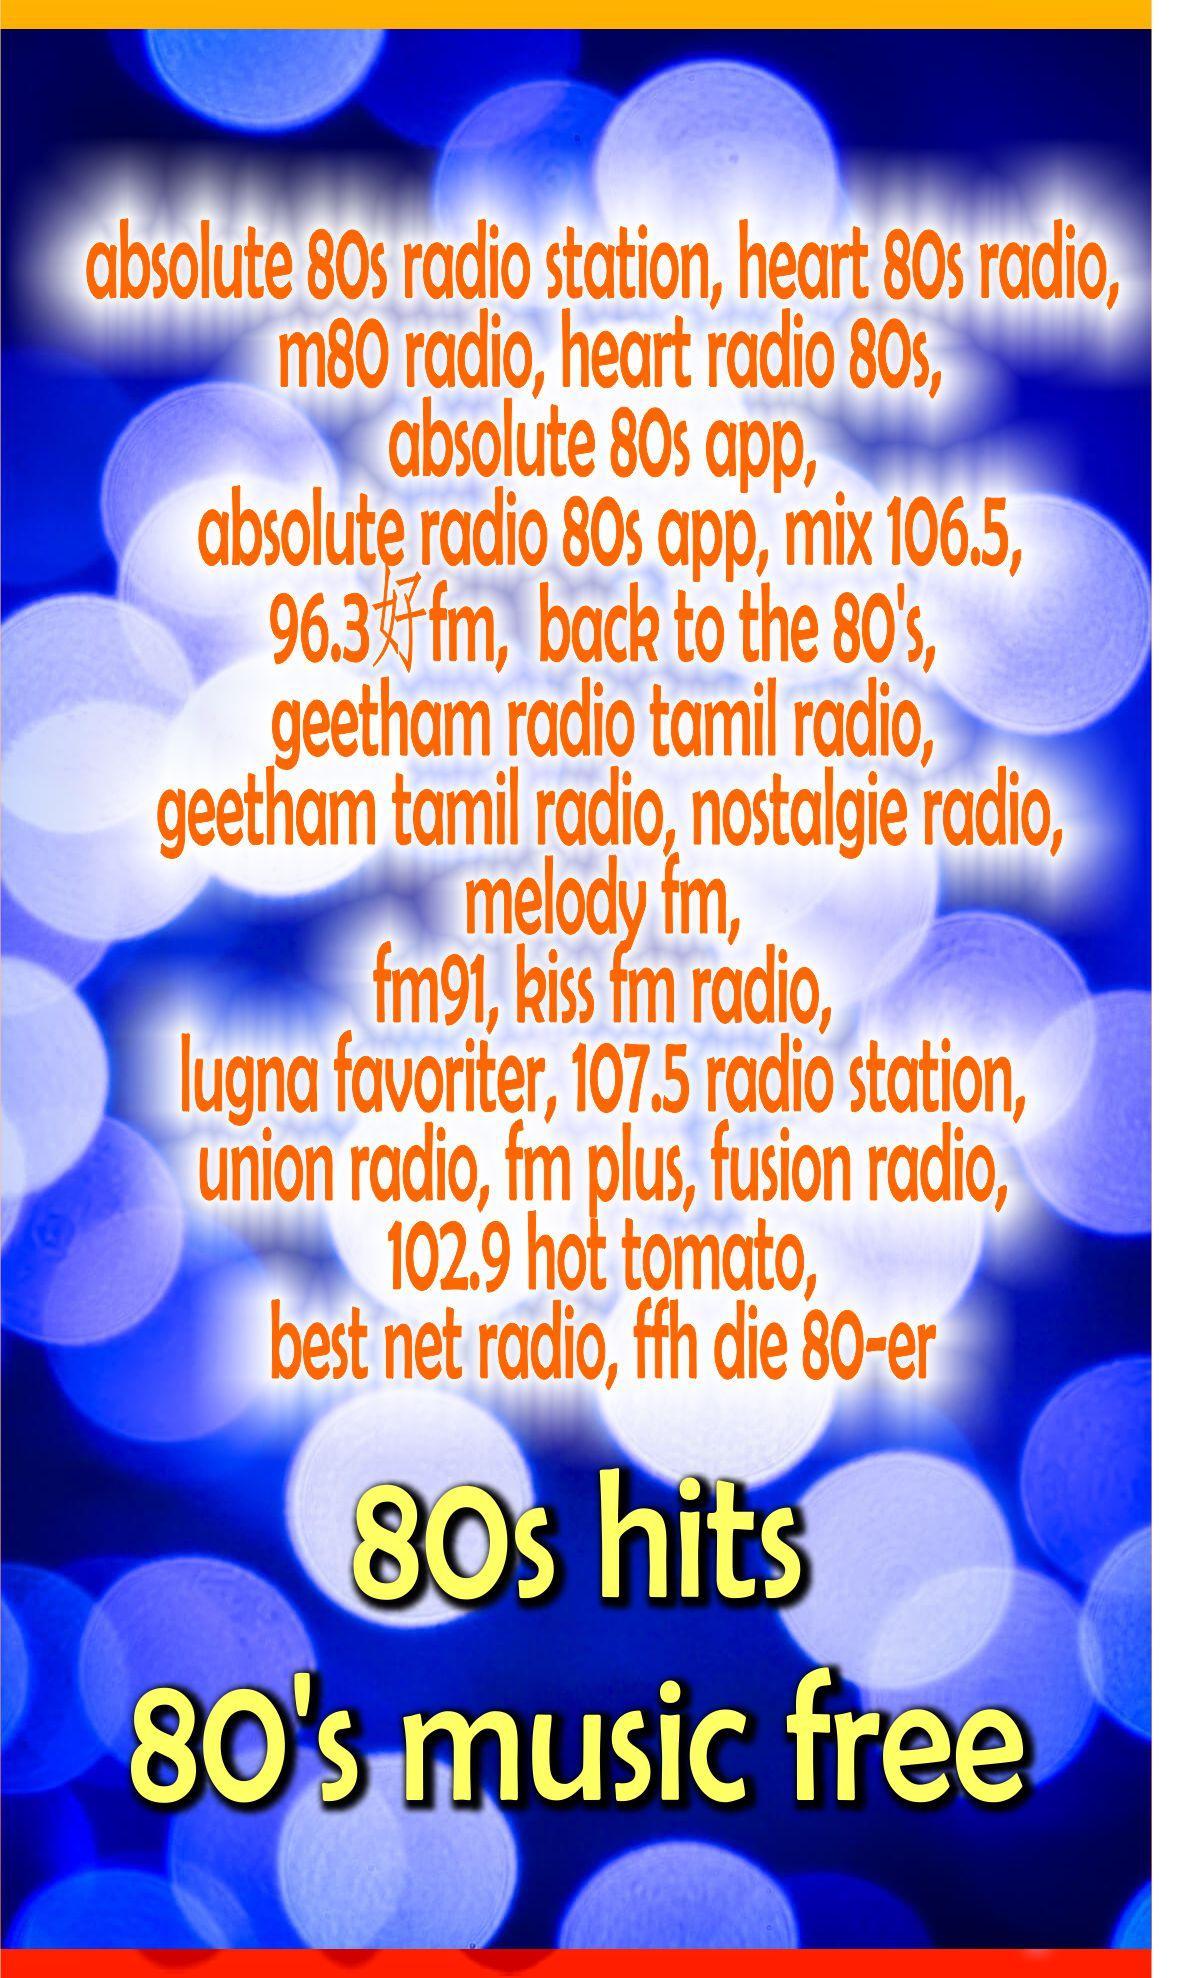 80's music radio: best of 80s free music 80s hits for Android - APK Download